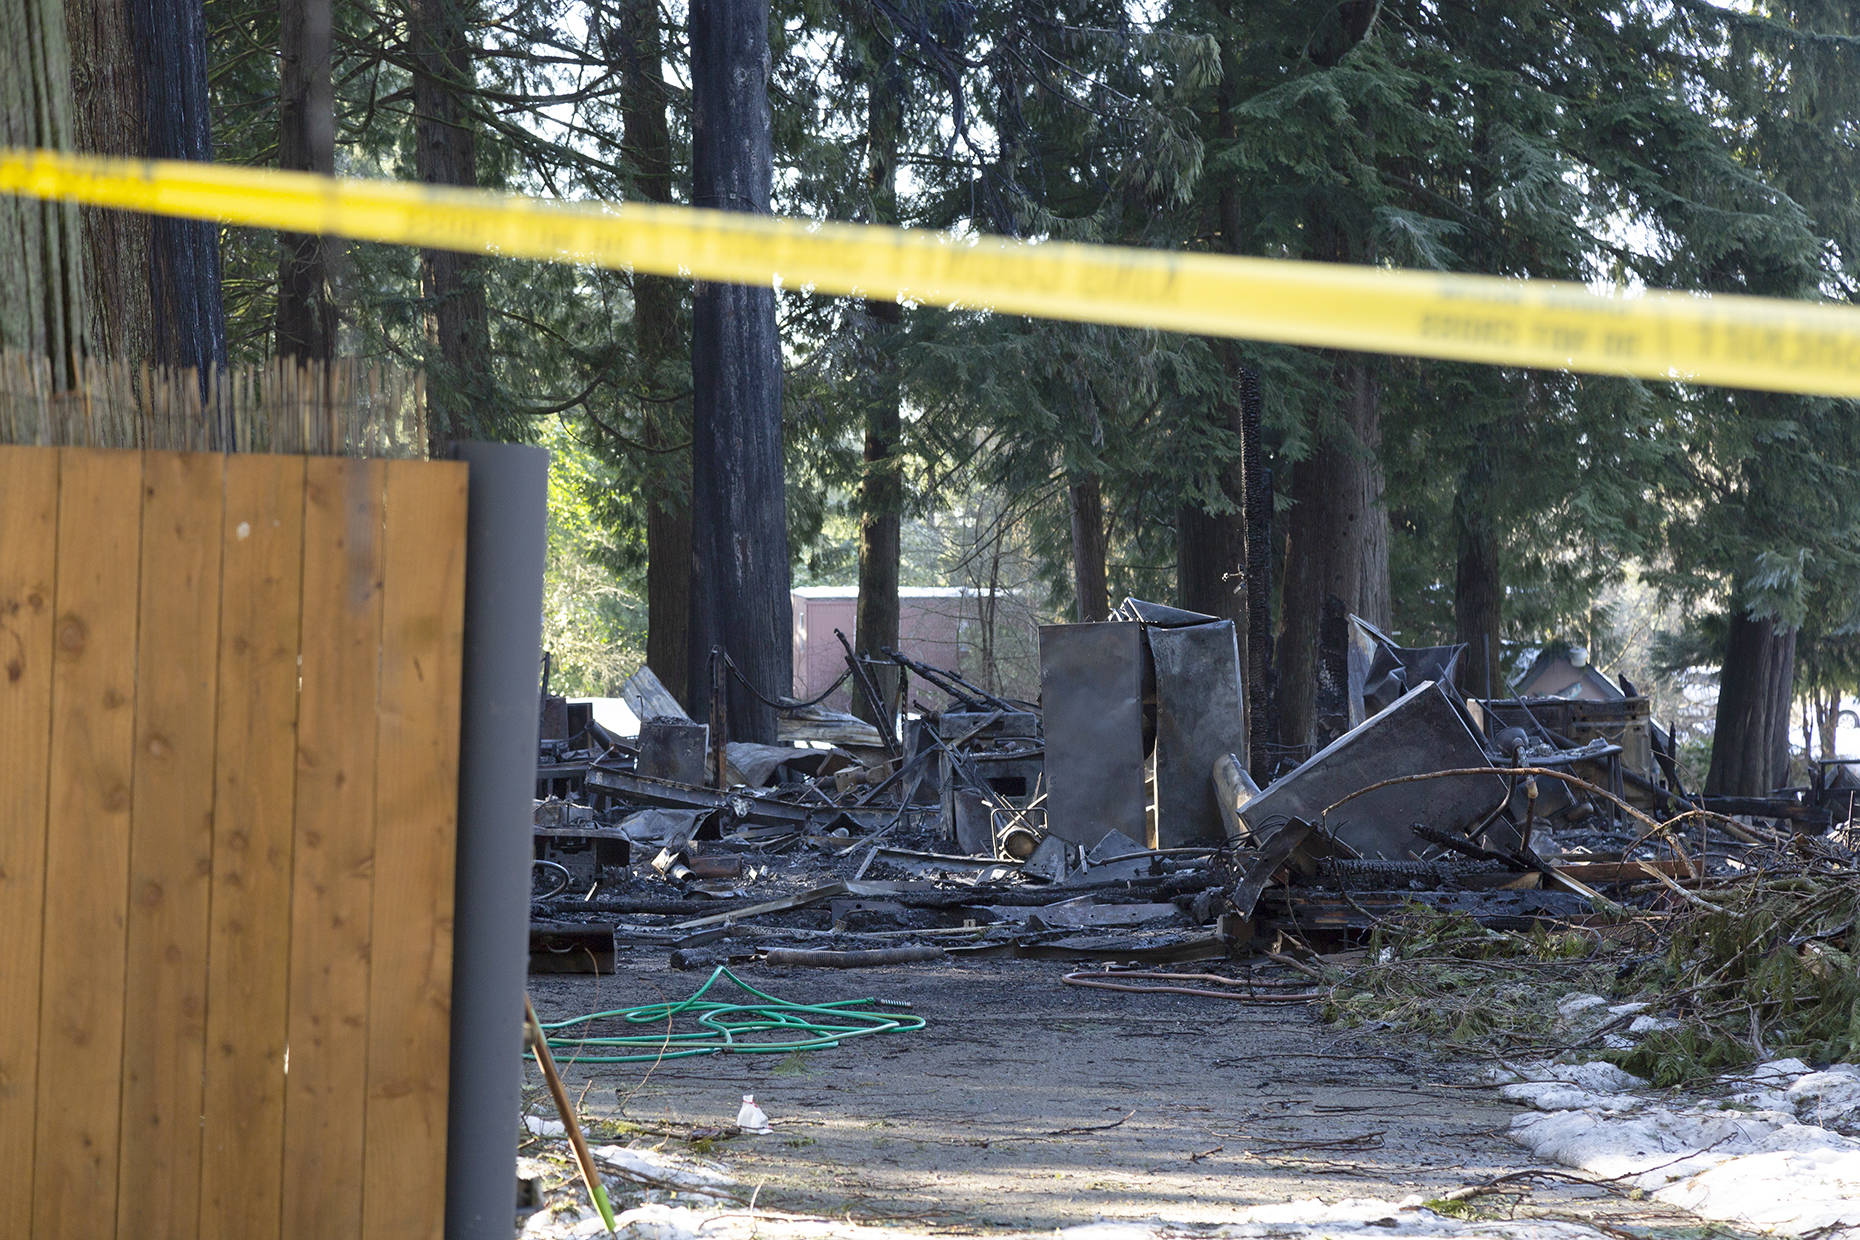 The damage remains days after the fire. Ashley Hiruko/staff photo